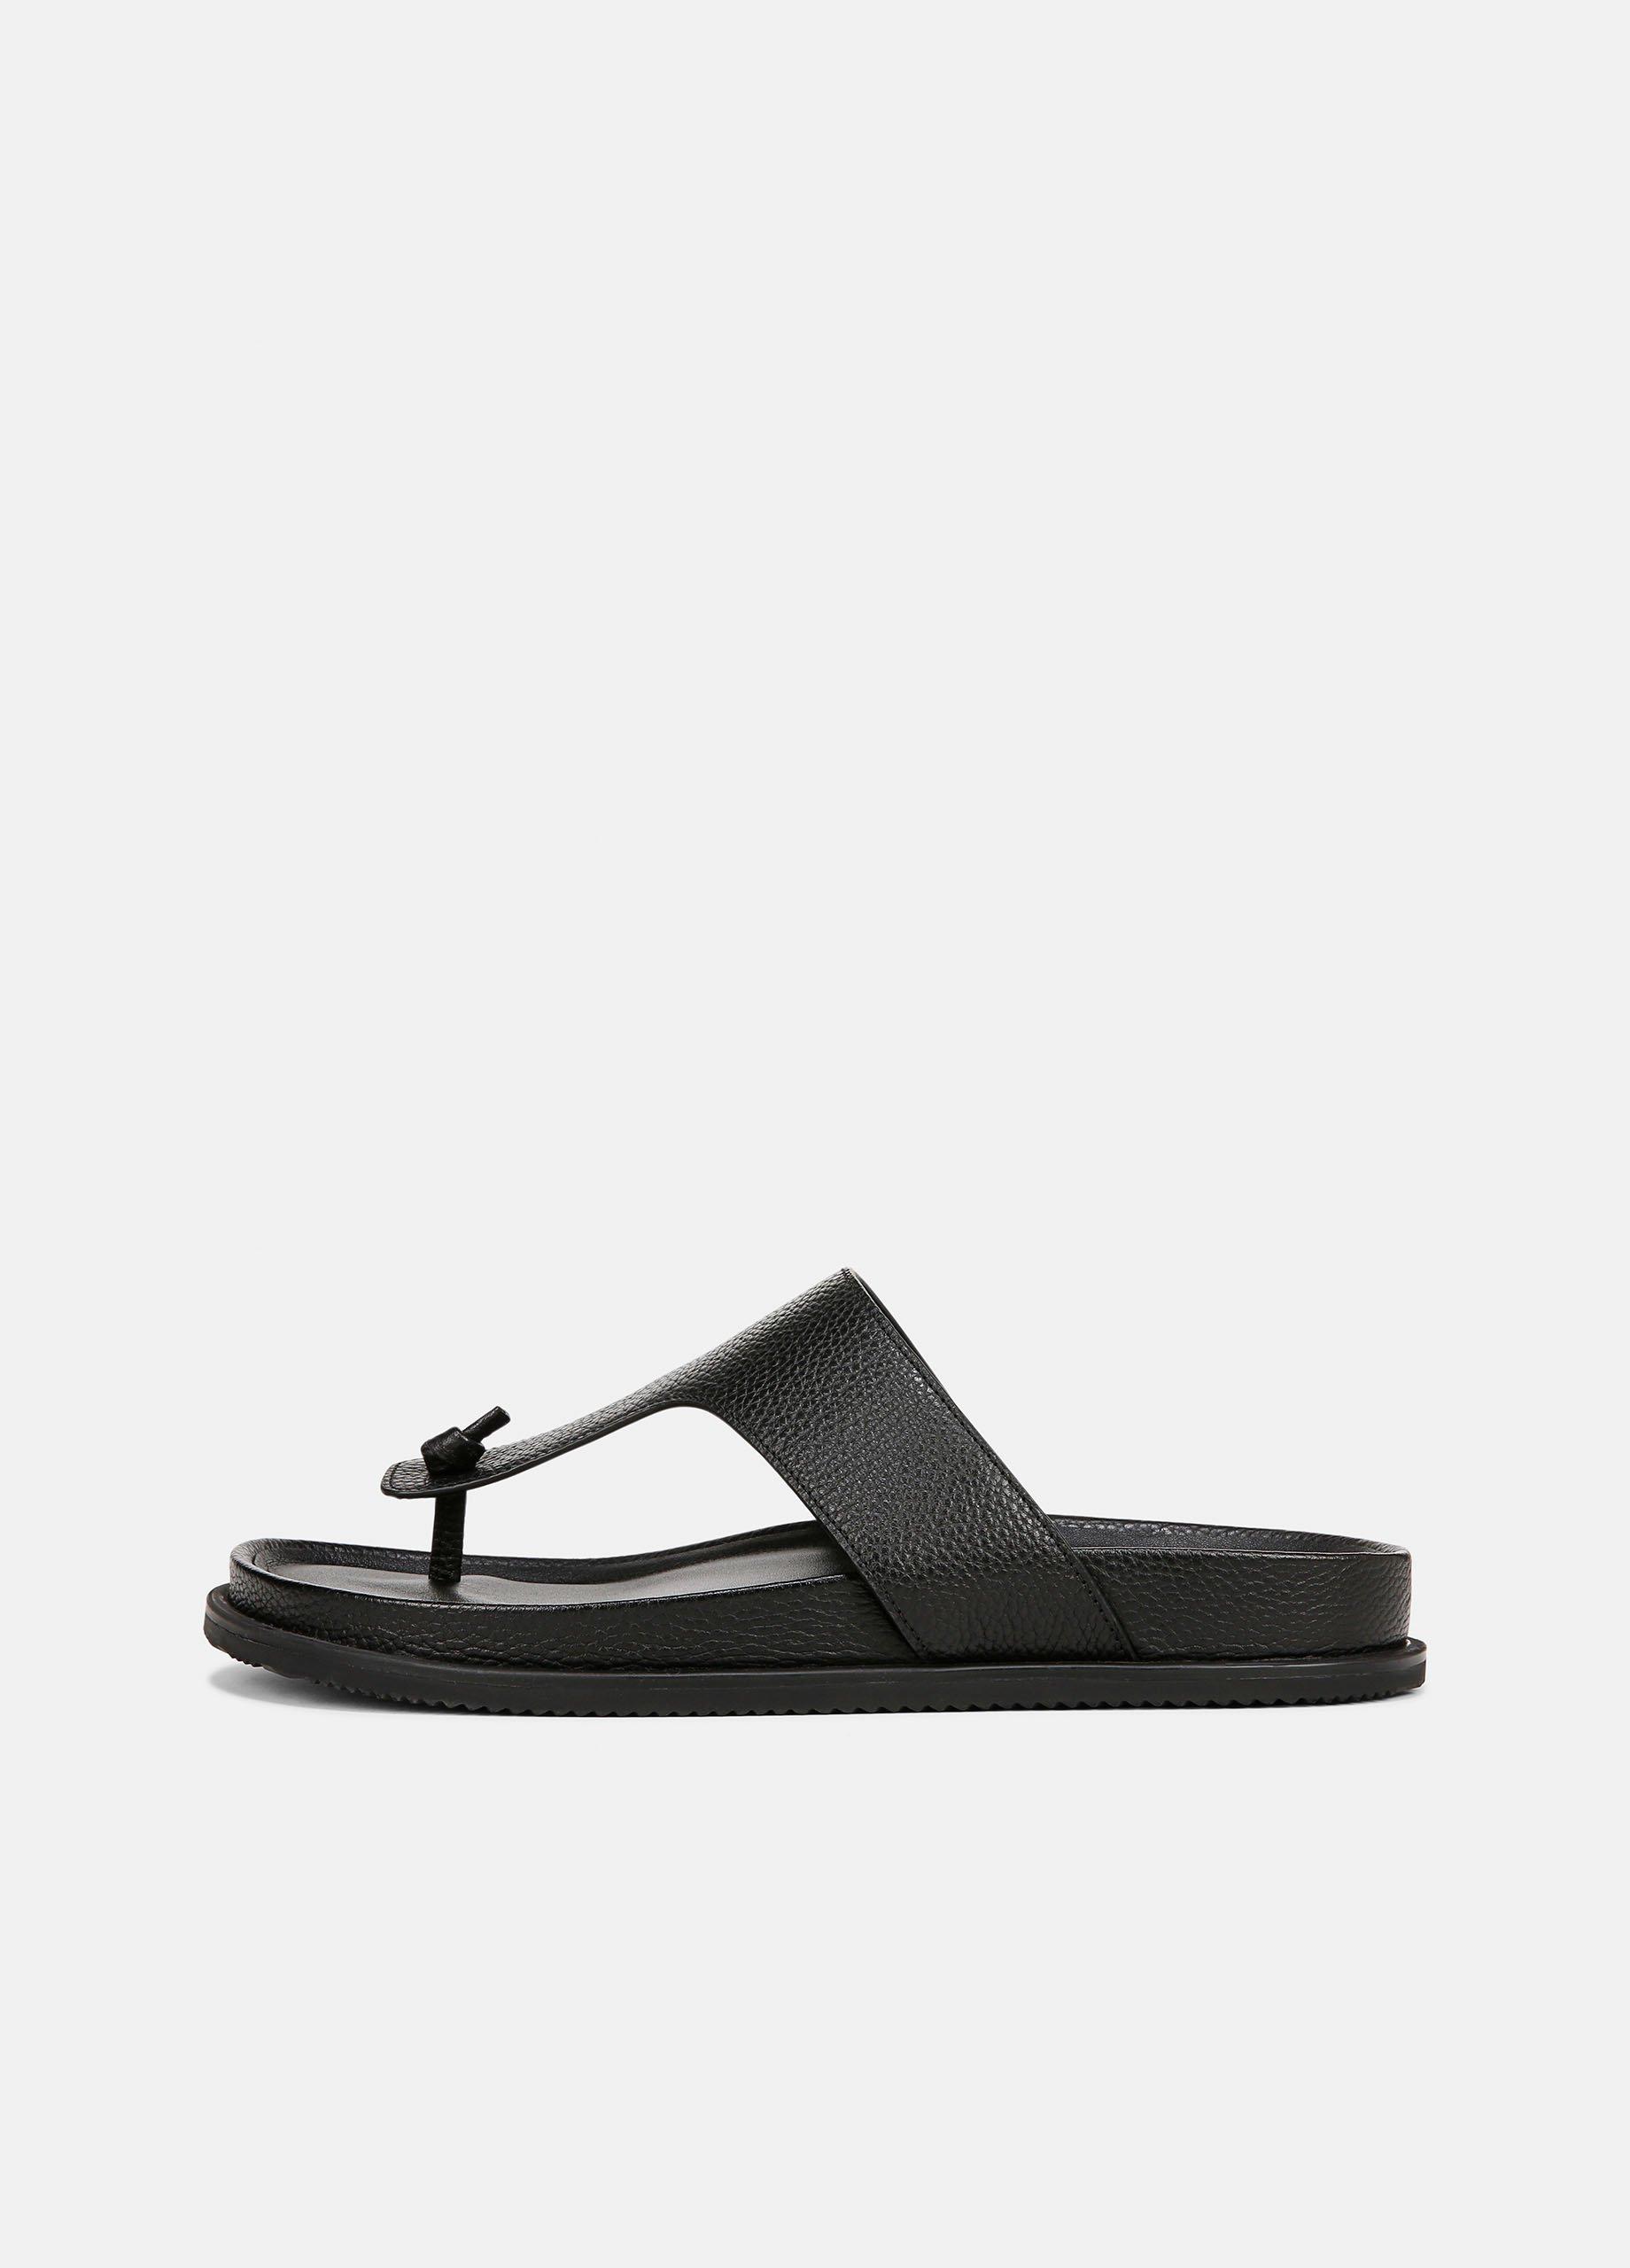 Diego Leather Thong Sandal, Black, Size 11.5 Vince